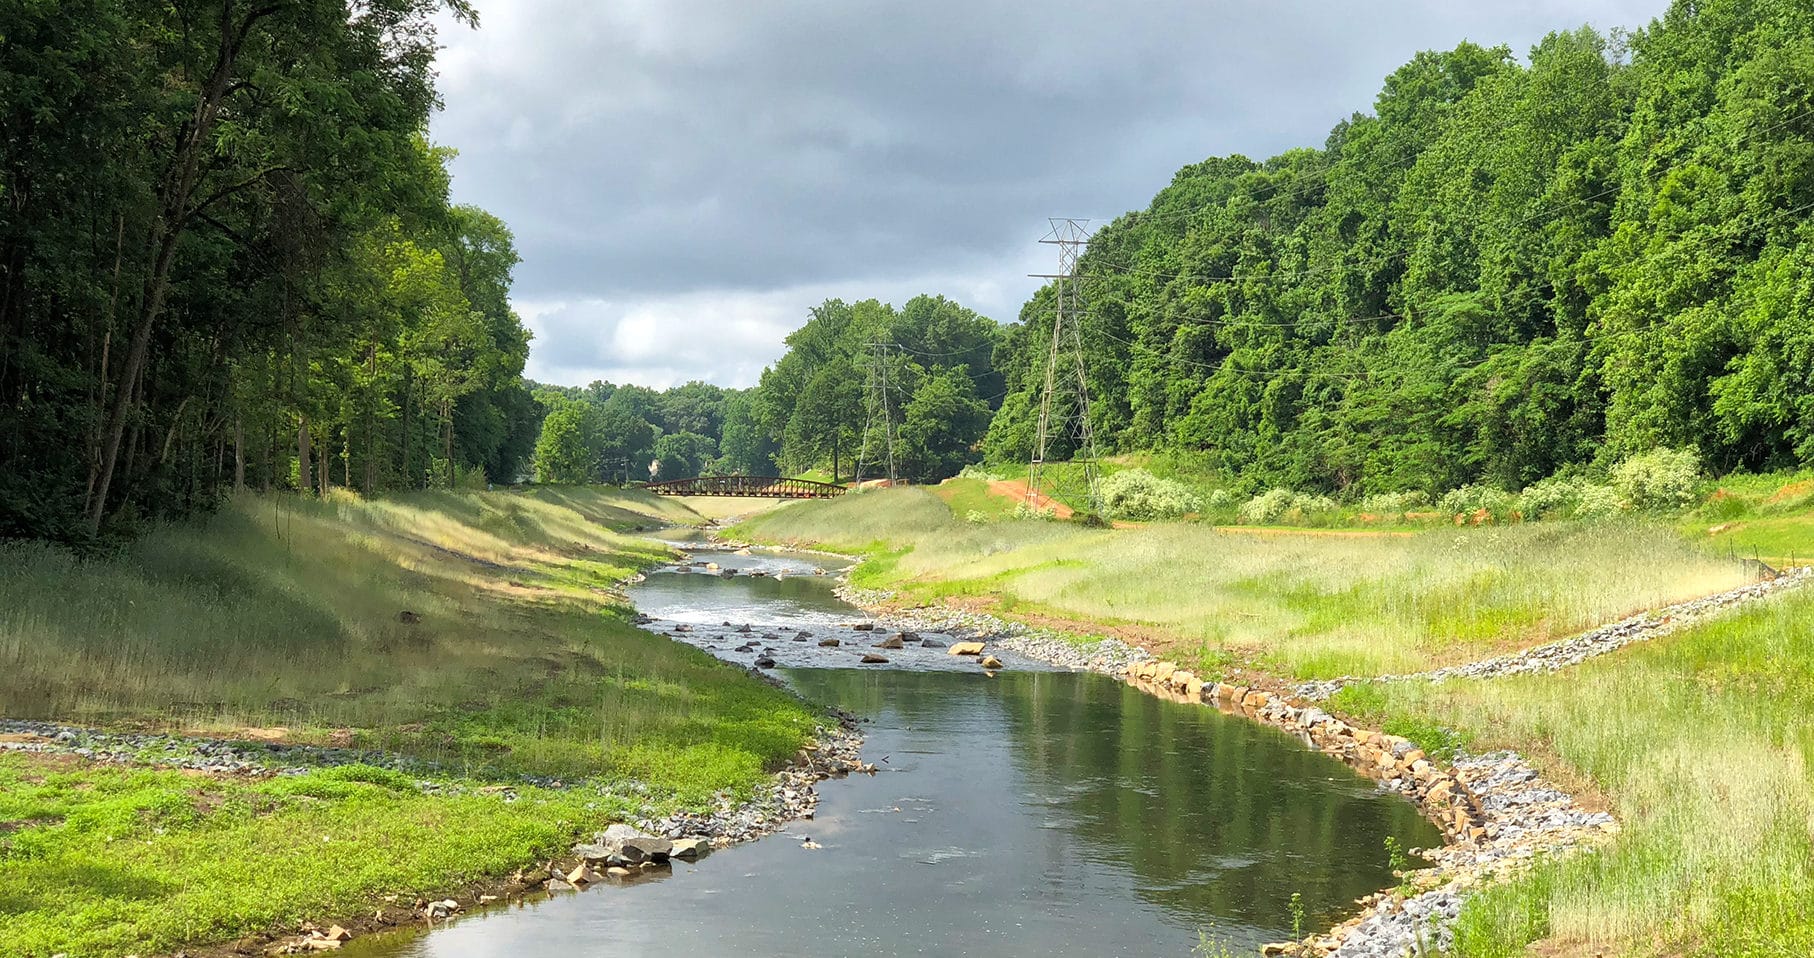 Kimley-Horn's Rob Hume shares how stream and river restoration could lead to healthier and happier natural environments and people.